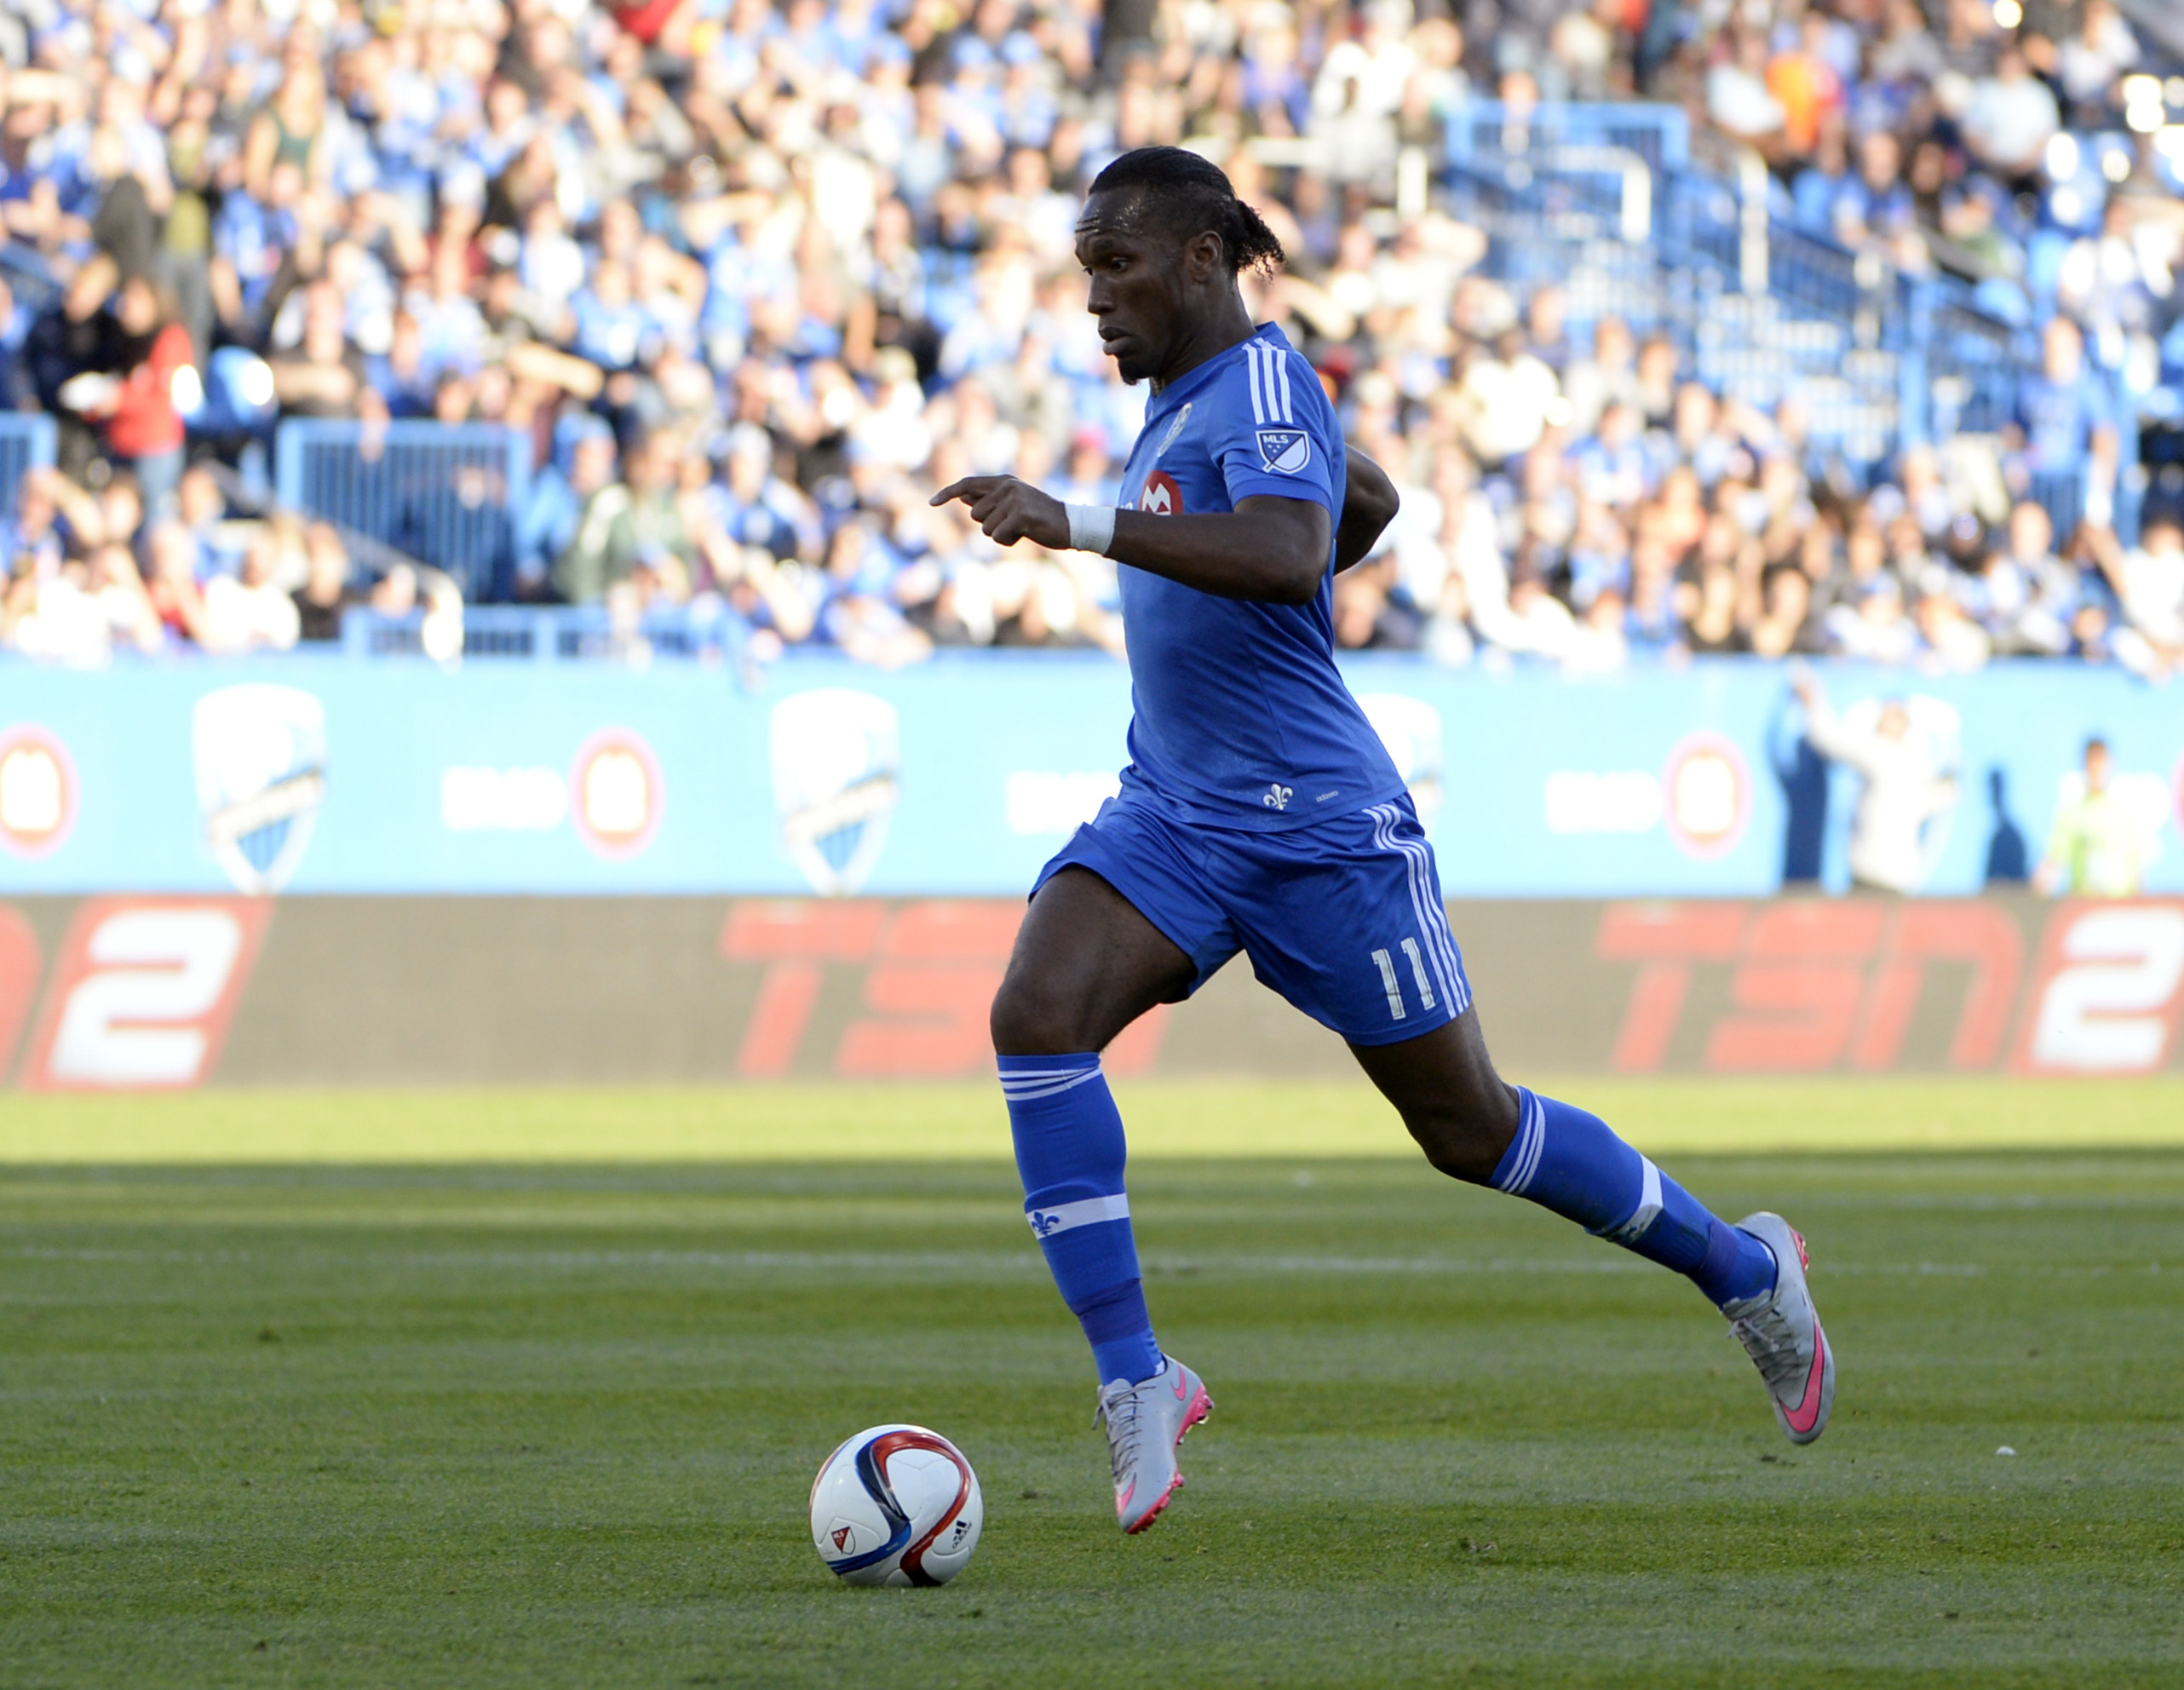 Drogba sets himself up for a shot in IMFC's 2-0 win versus DC United on Saturday.